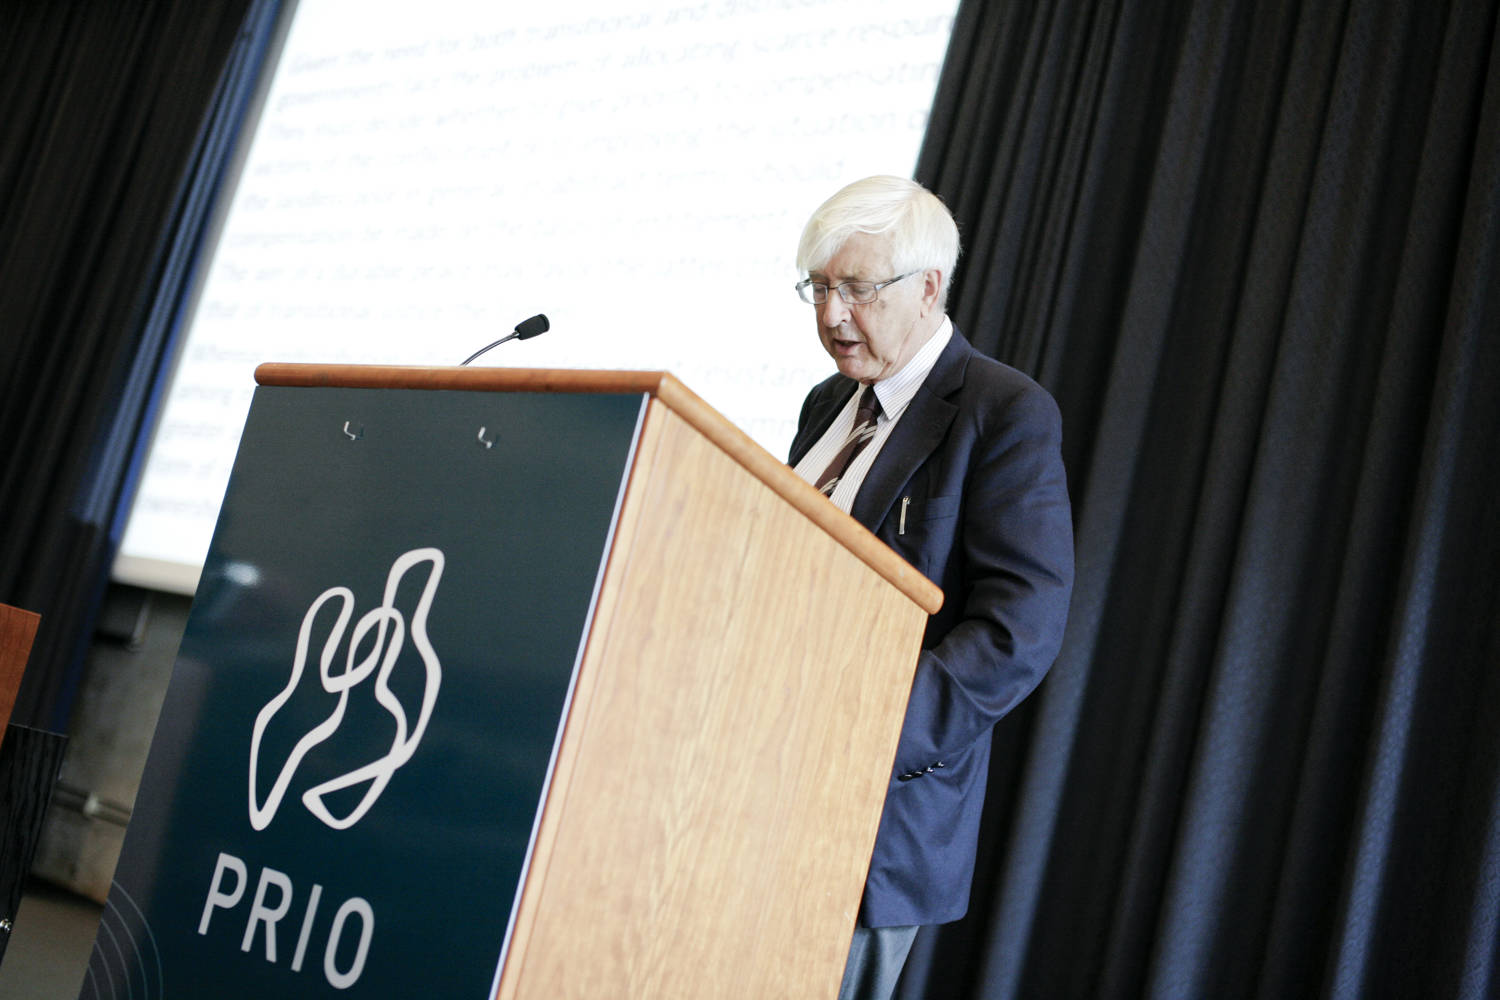 Jon Elster gives the PRIO Annual Peace Address 2010. PRIO